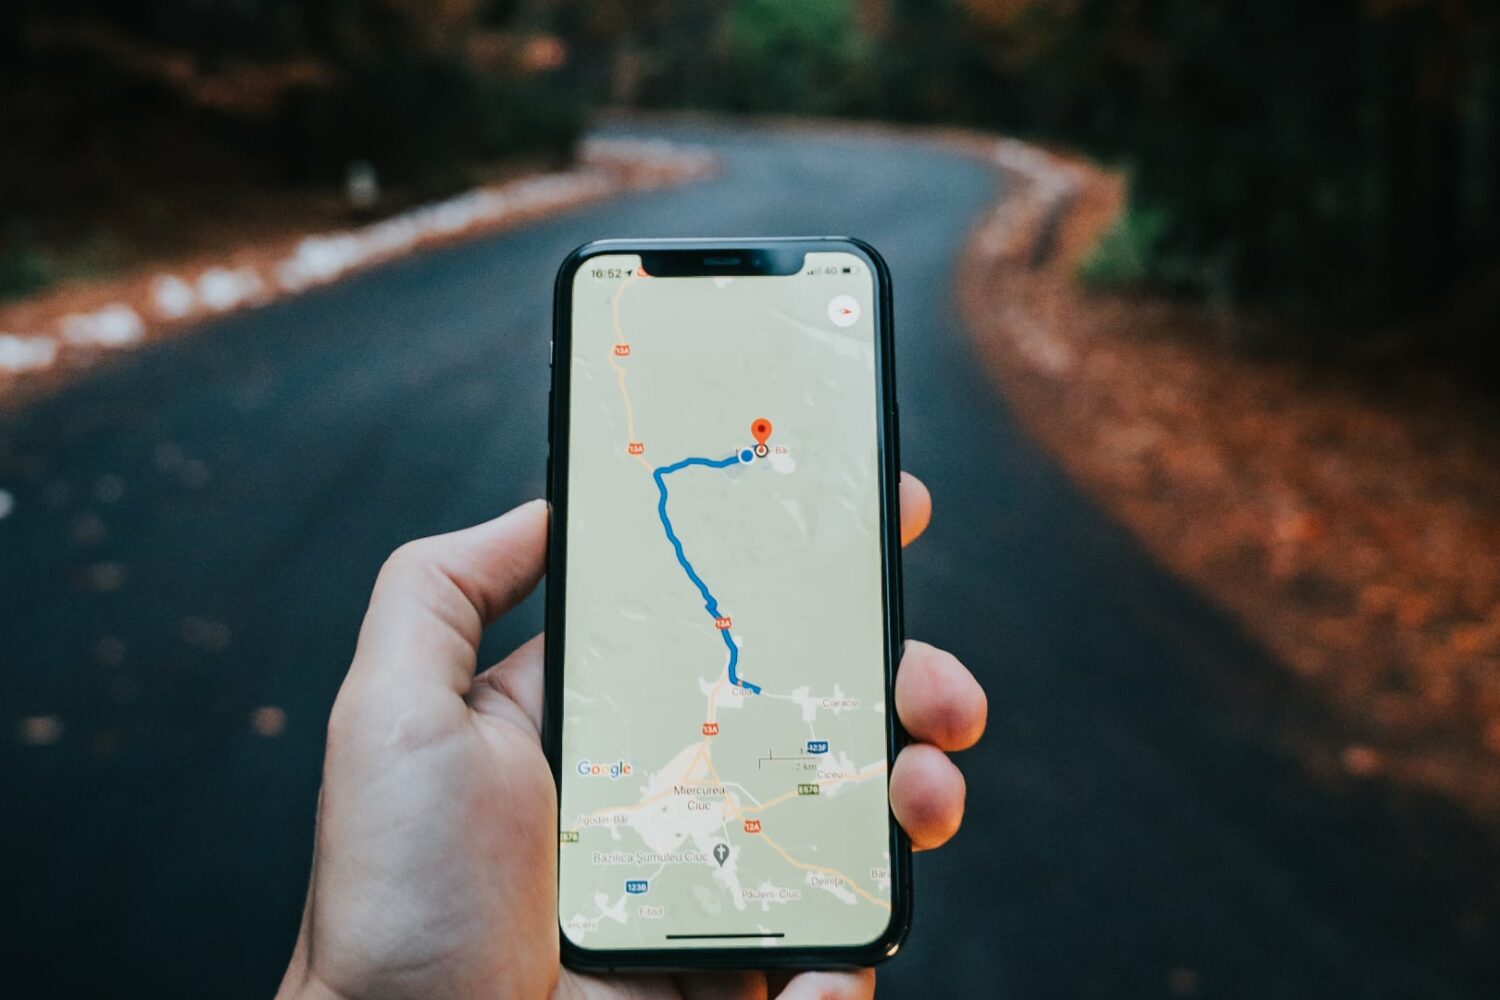 iPhone in a male's hand in the woods, displaying navigation directions in Google Maps